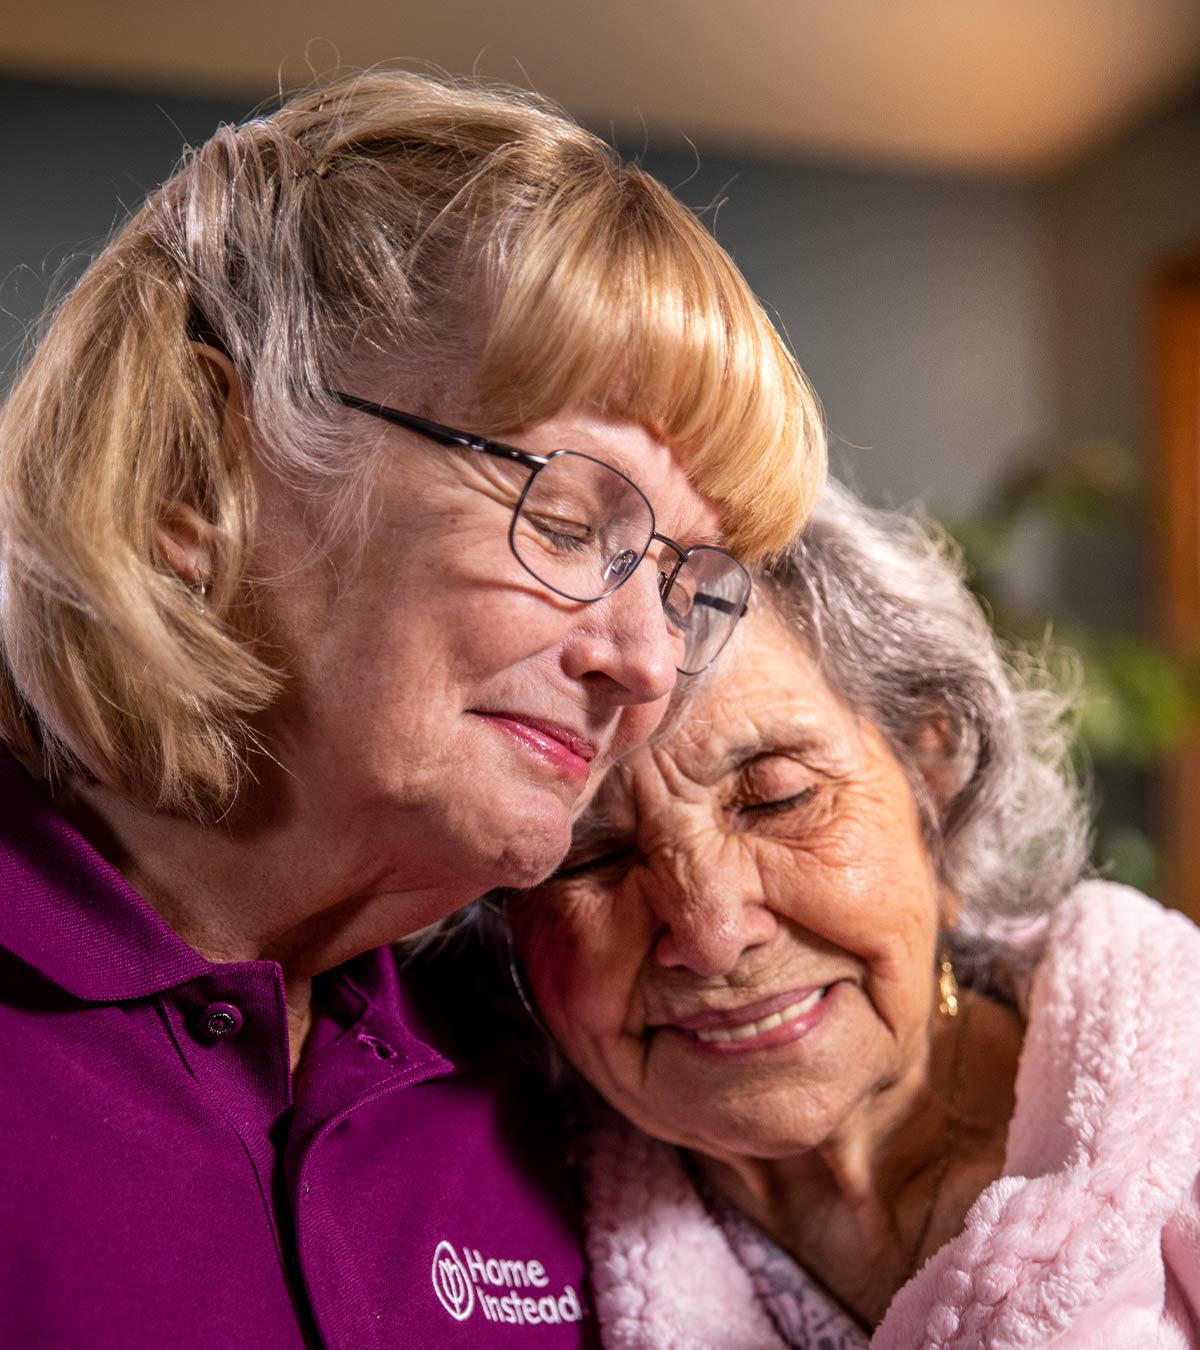 CAREGiver providing in-home senior care services. Home Instead of Green Bay, WI provides Elder Care to aging adults. 